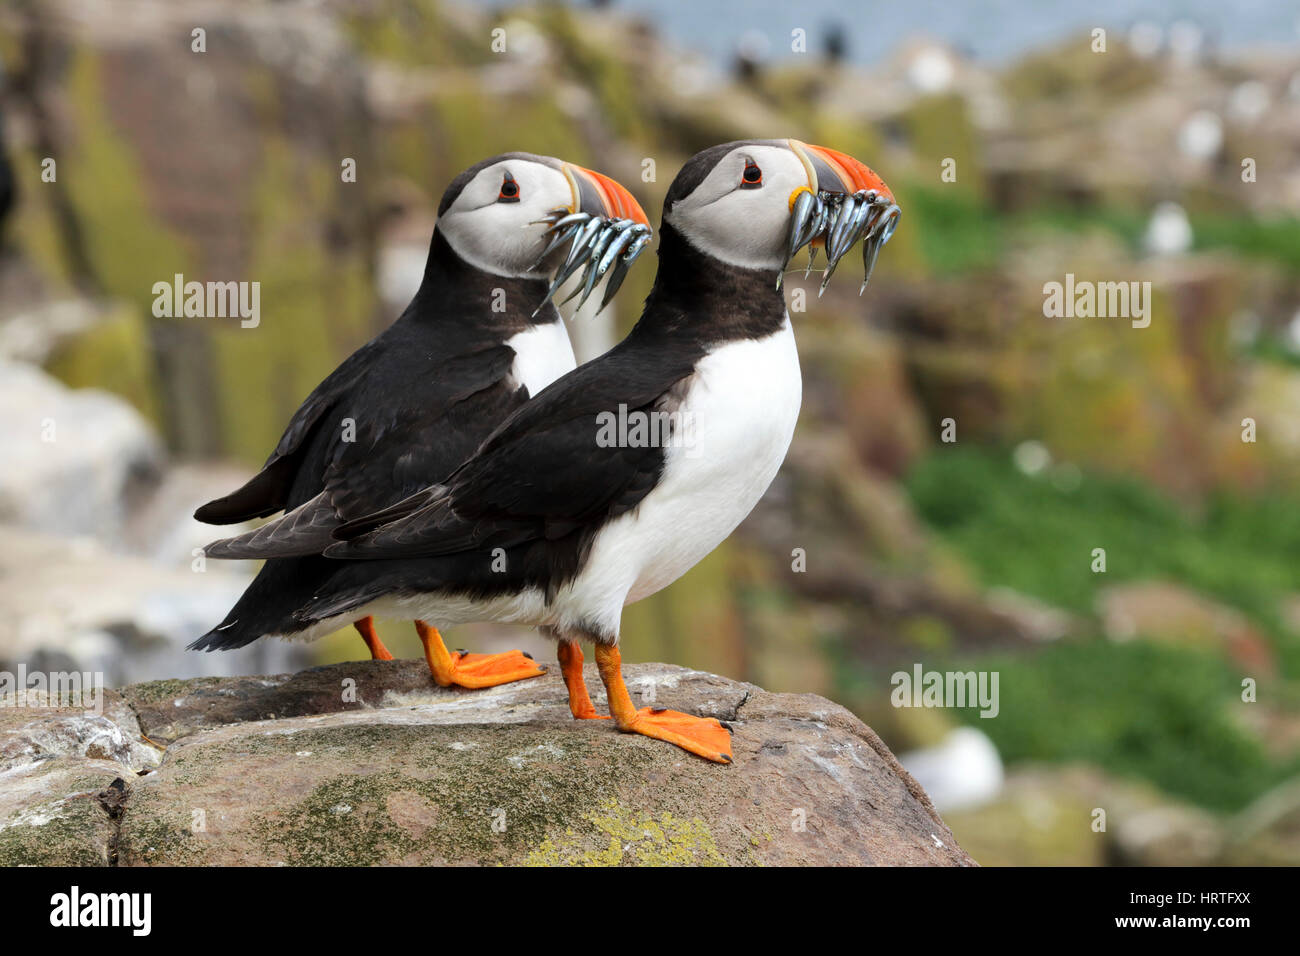 Atlantic Puffin, Fratercula arctica with lesser sand eels also called sand lance, Ammodytes tobianus, Farne islands, Northumbria, UK. Stock Photo